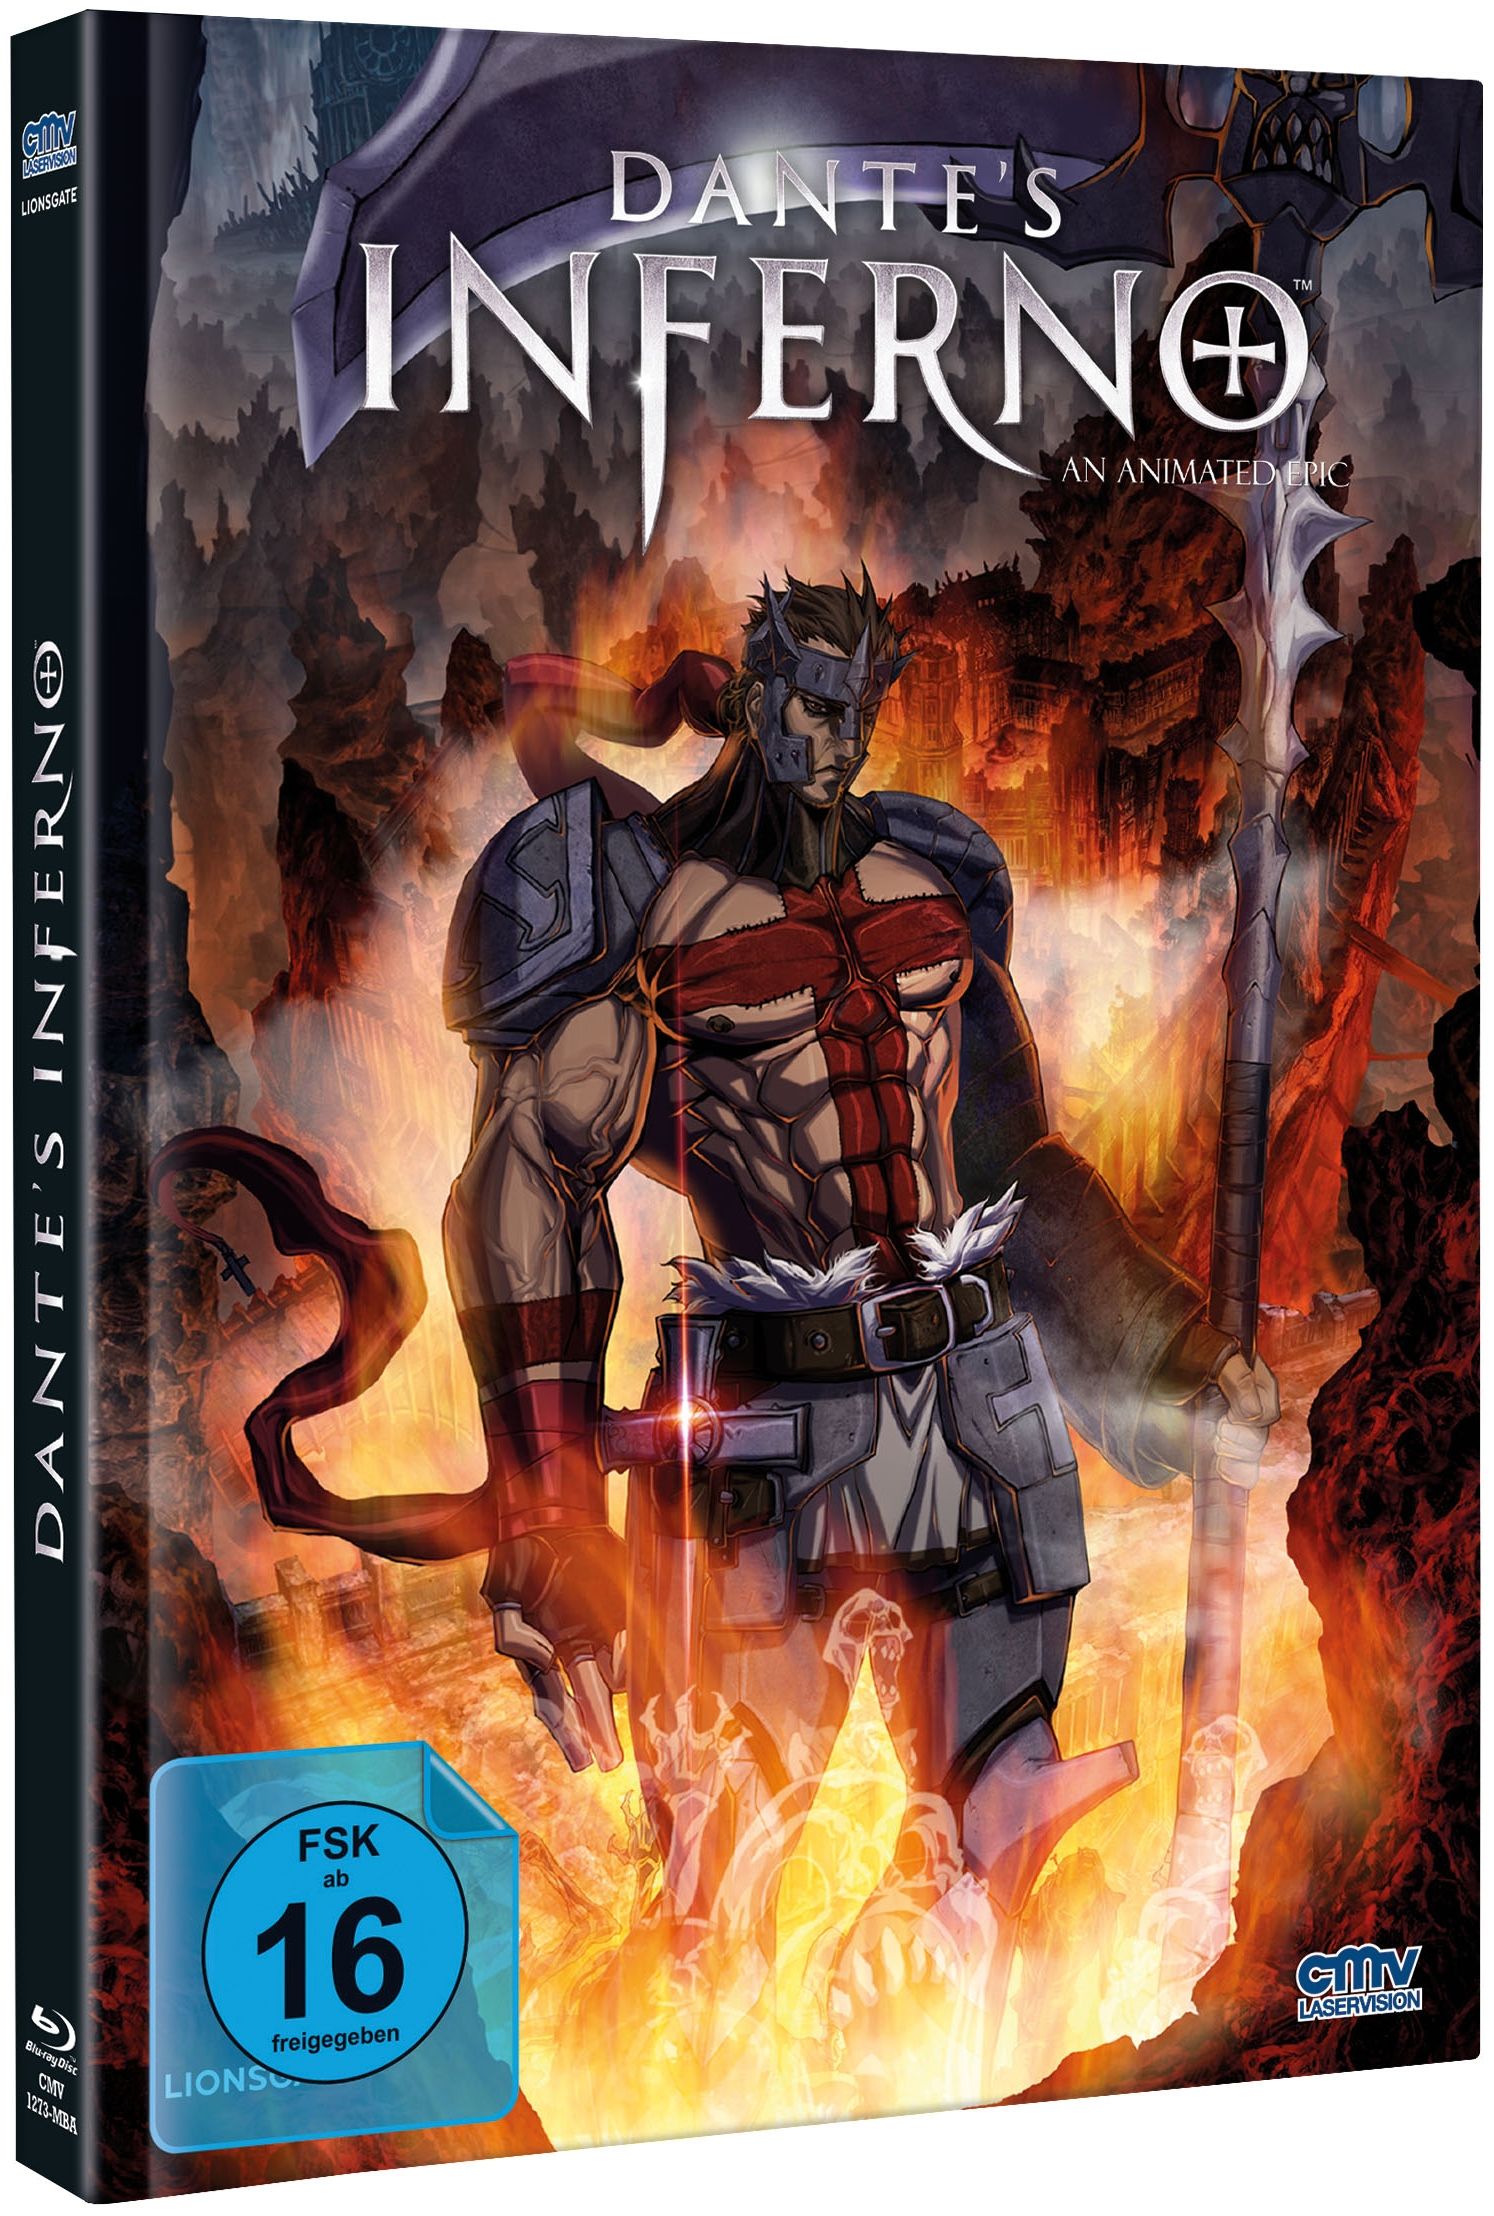 Dante's Inferno - An Animated Epic (Lim. Uncut Mediabook - Cover D) (DVD + BLURAY)